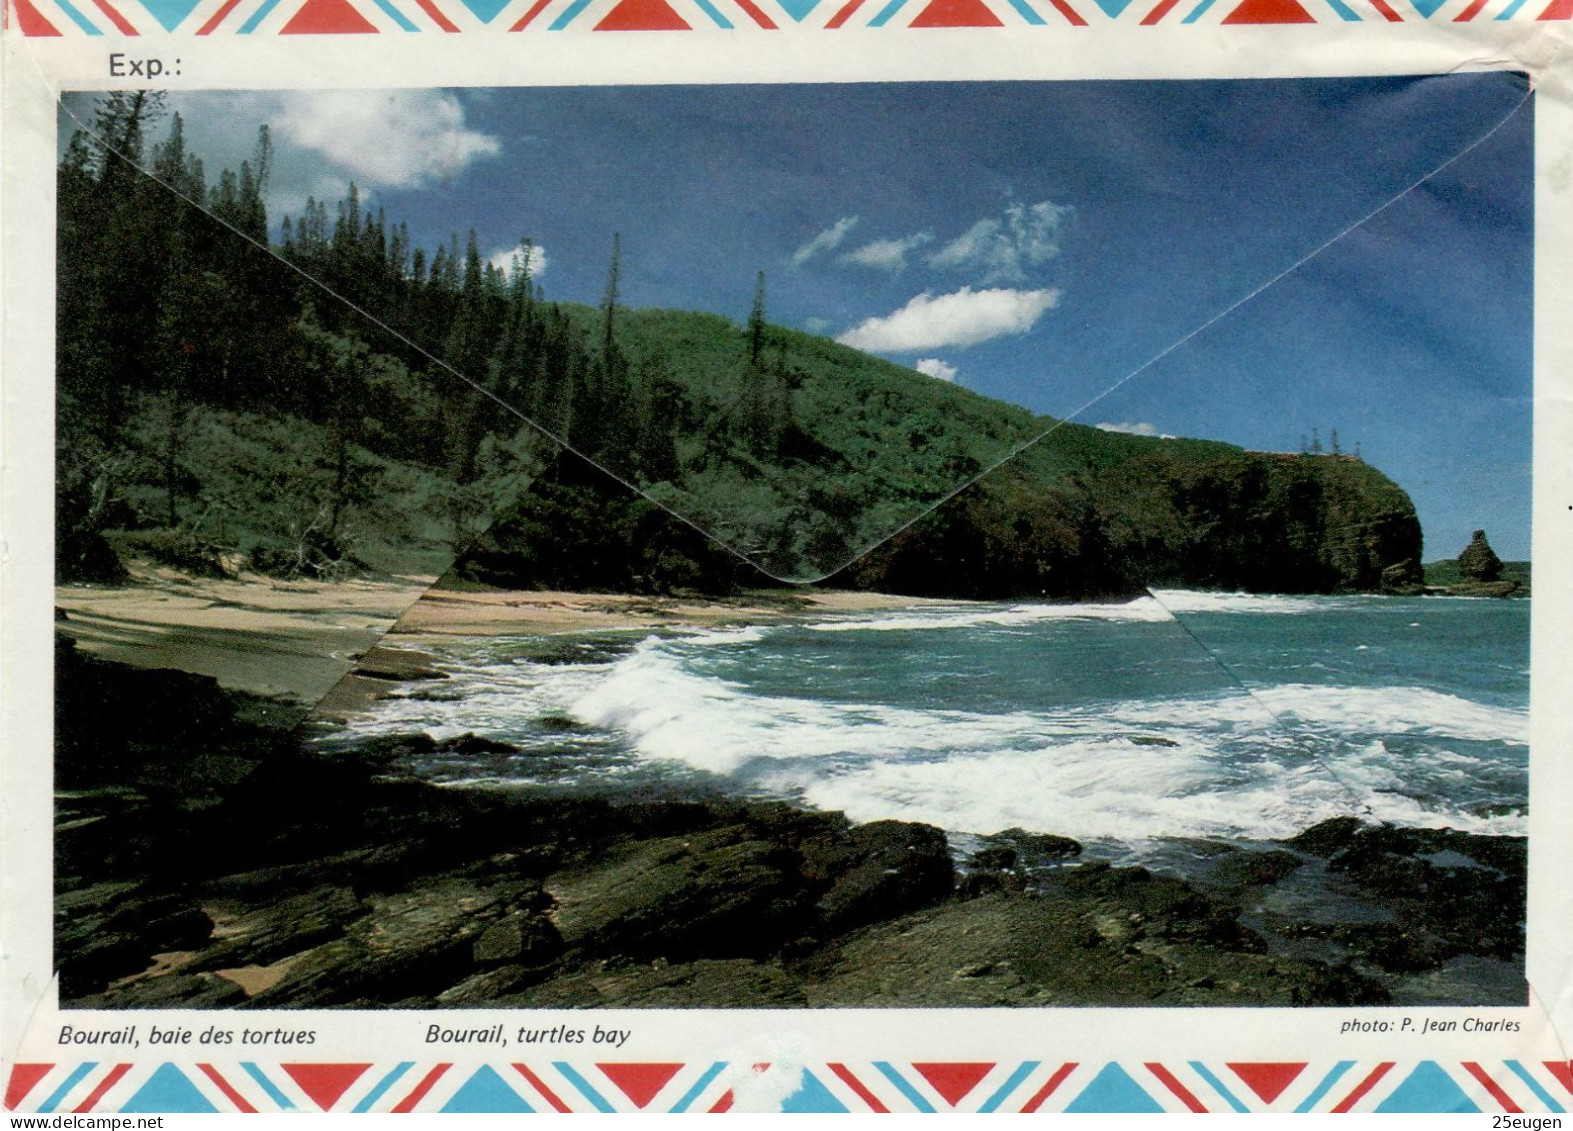 NEW CALEDONIA 1986 AIRMAIL LETTER SENT TO TOULON - Storia Postale